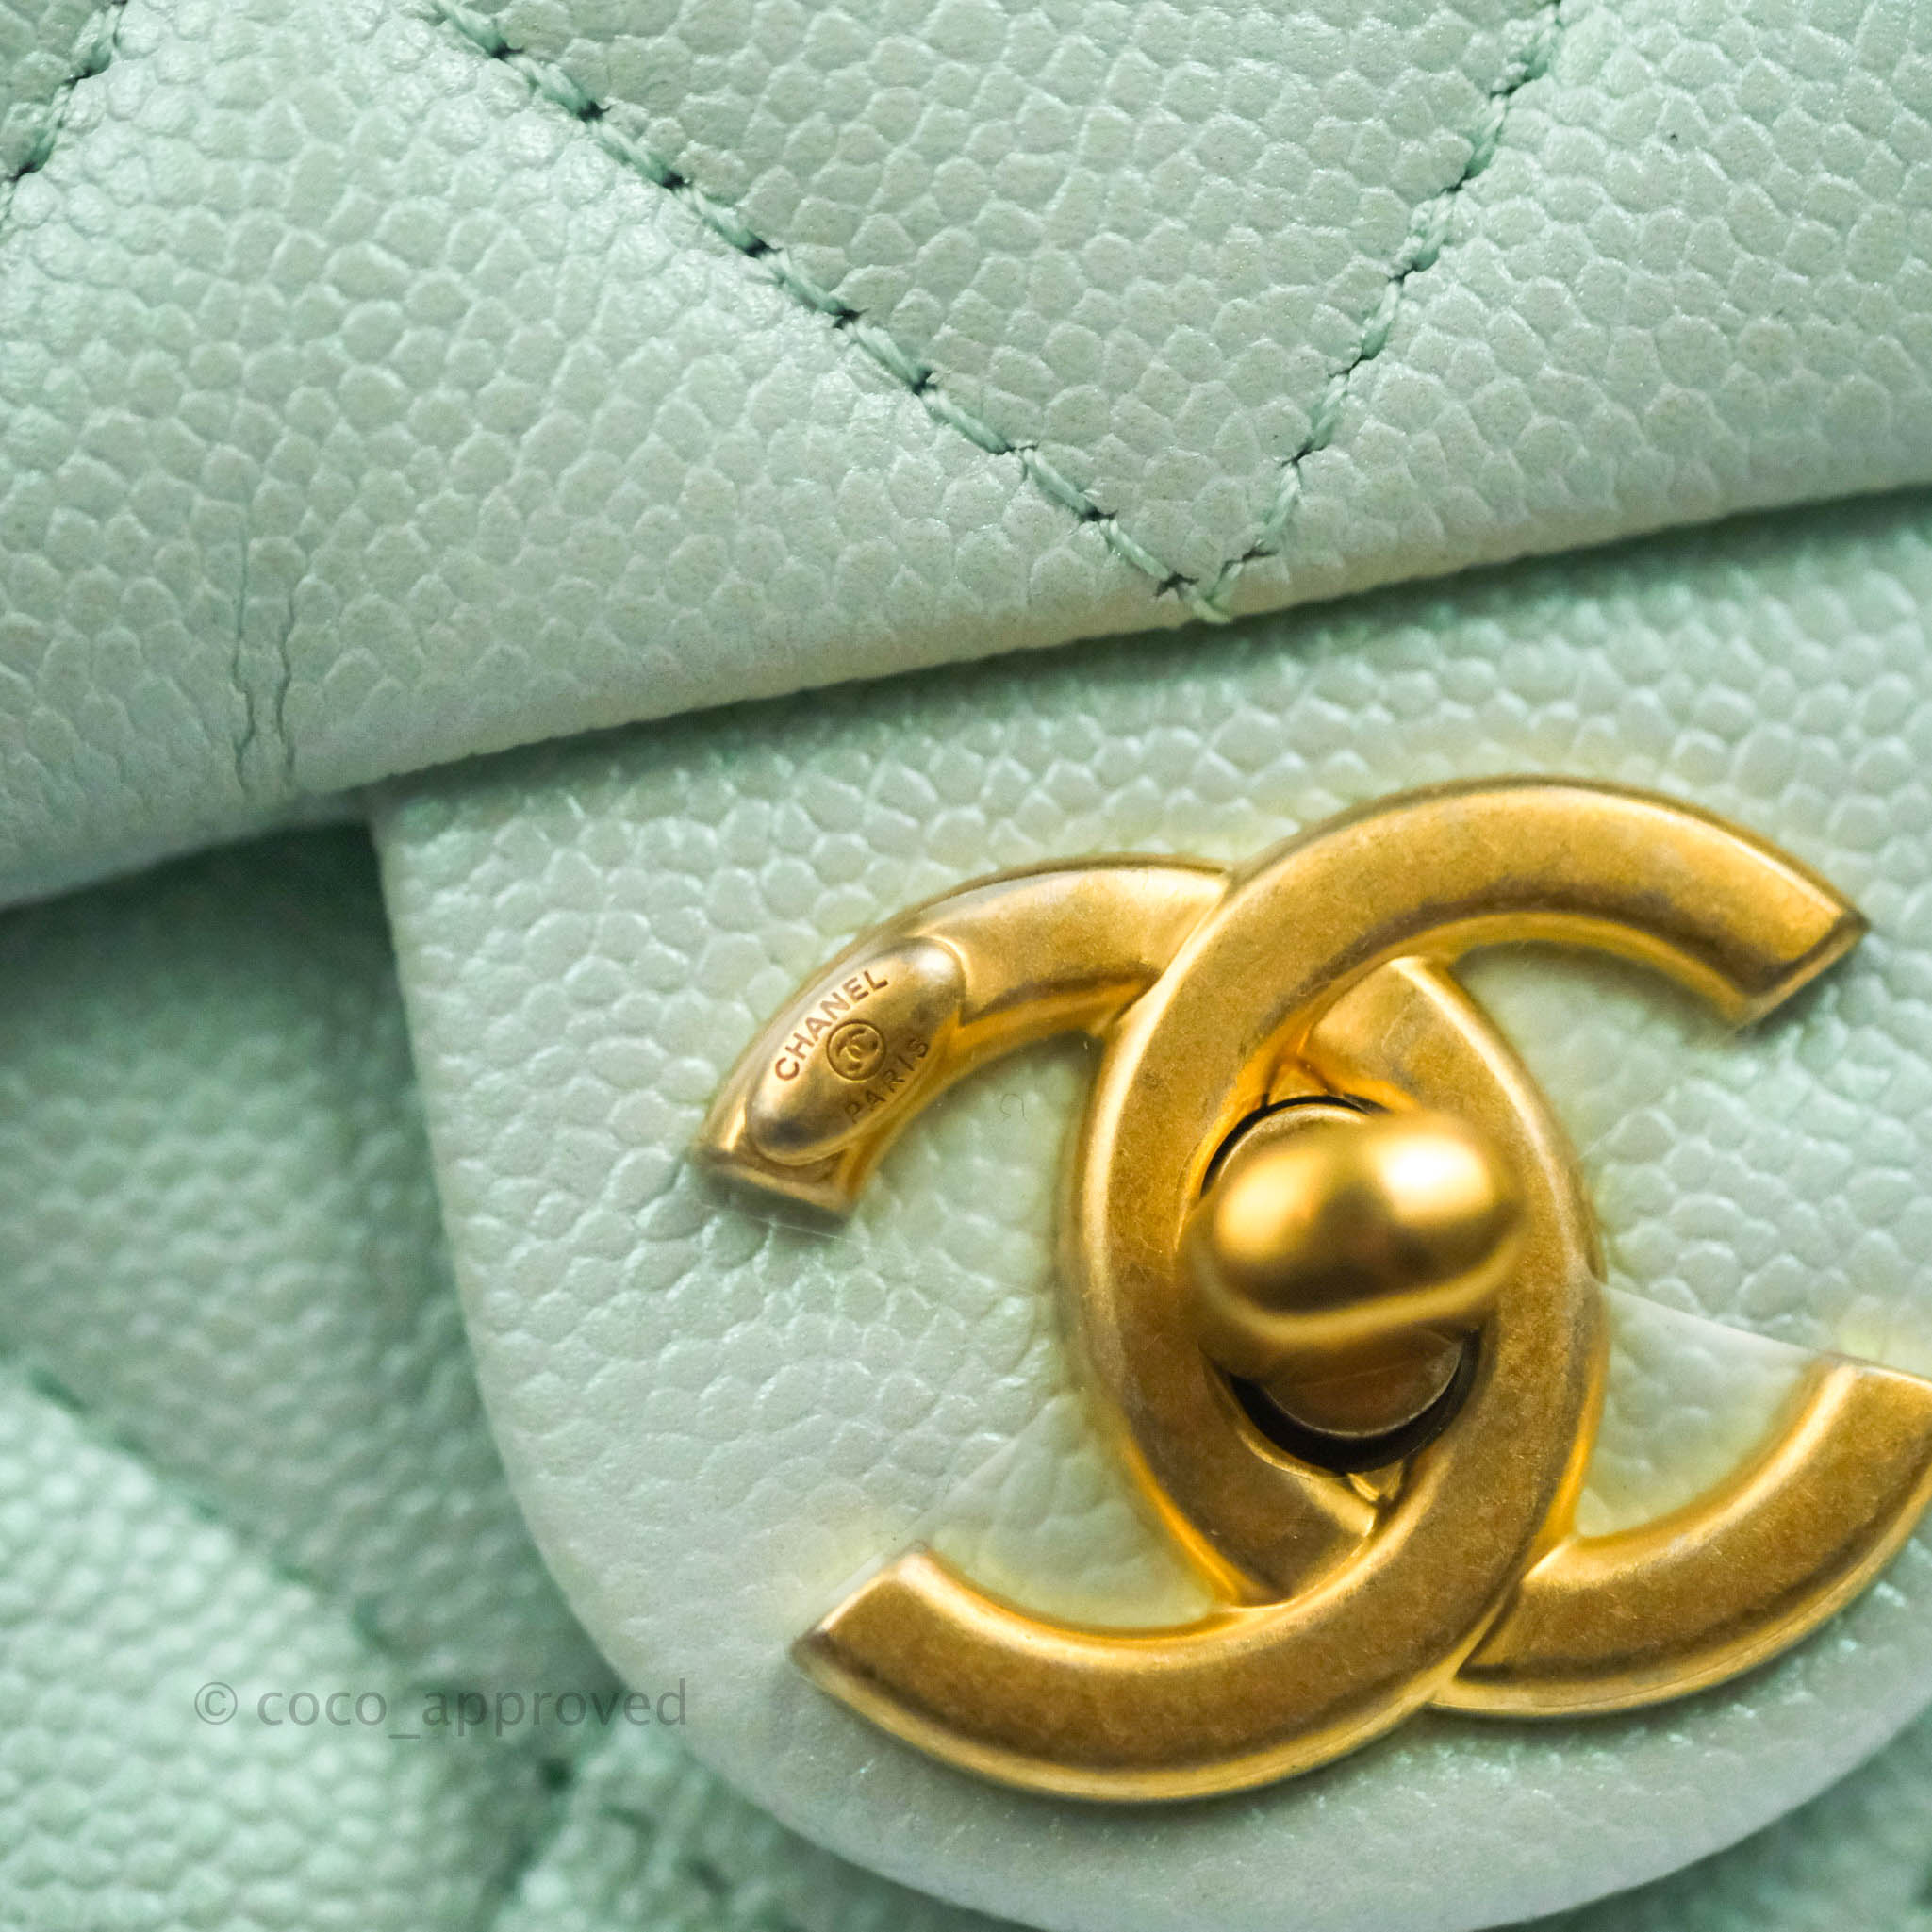 CHANEL Iridescent Caviar Quilted Mini My Perfect Camera Case Pink